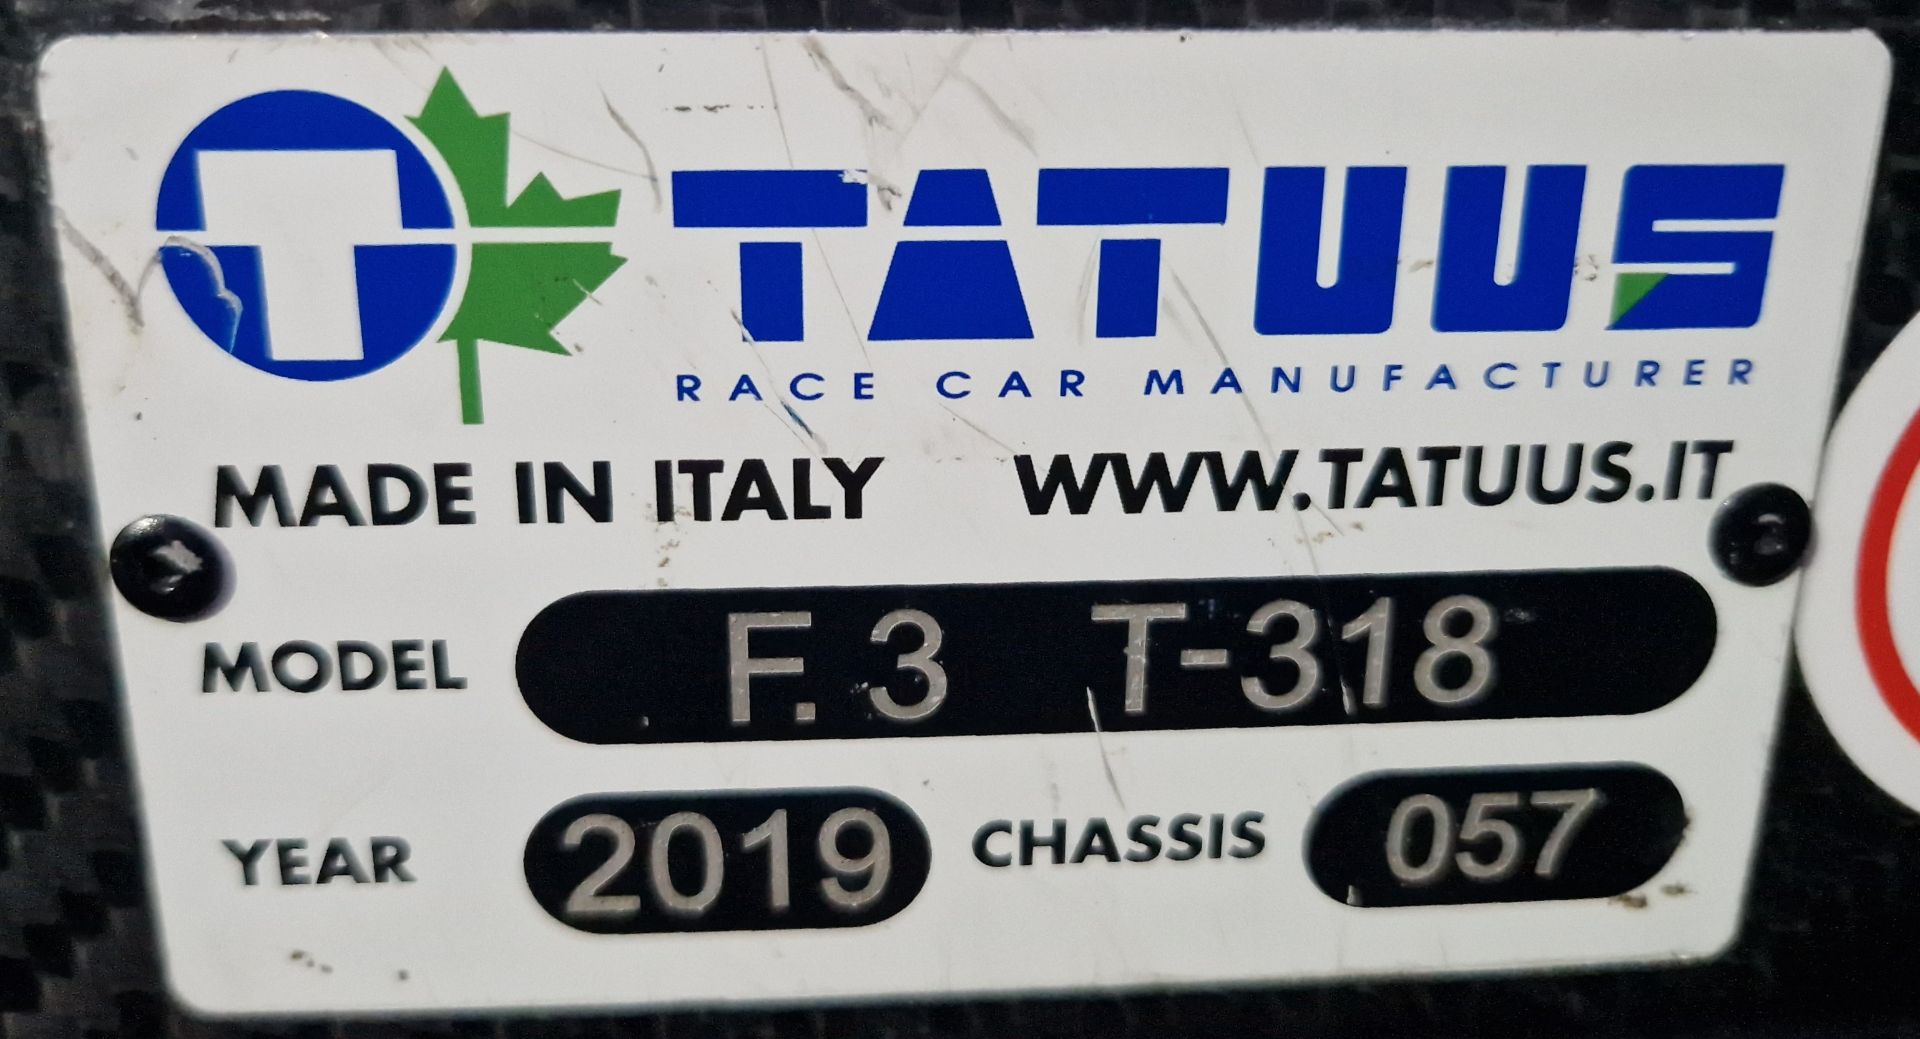 One TATUUS F3 T-318 Alfa Romeo Race Car Chassis No. 057 (2019) Finished in the W Series Academy - Image 6 of 7